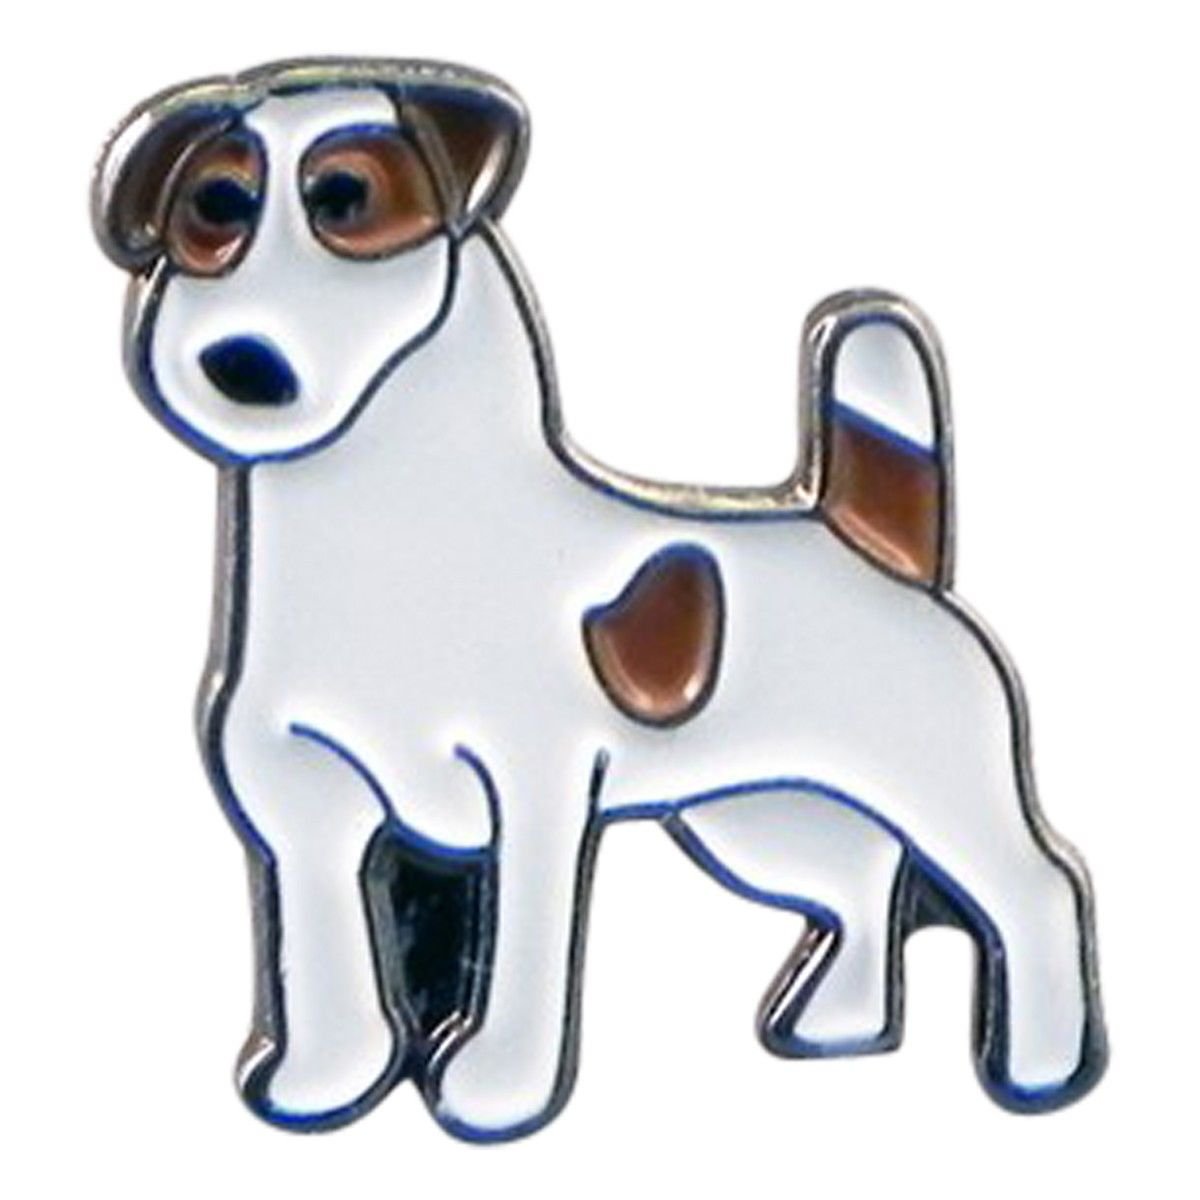 Jack Russell Pin - Reversnål fra The Prince's Own hos The Prince Webshop